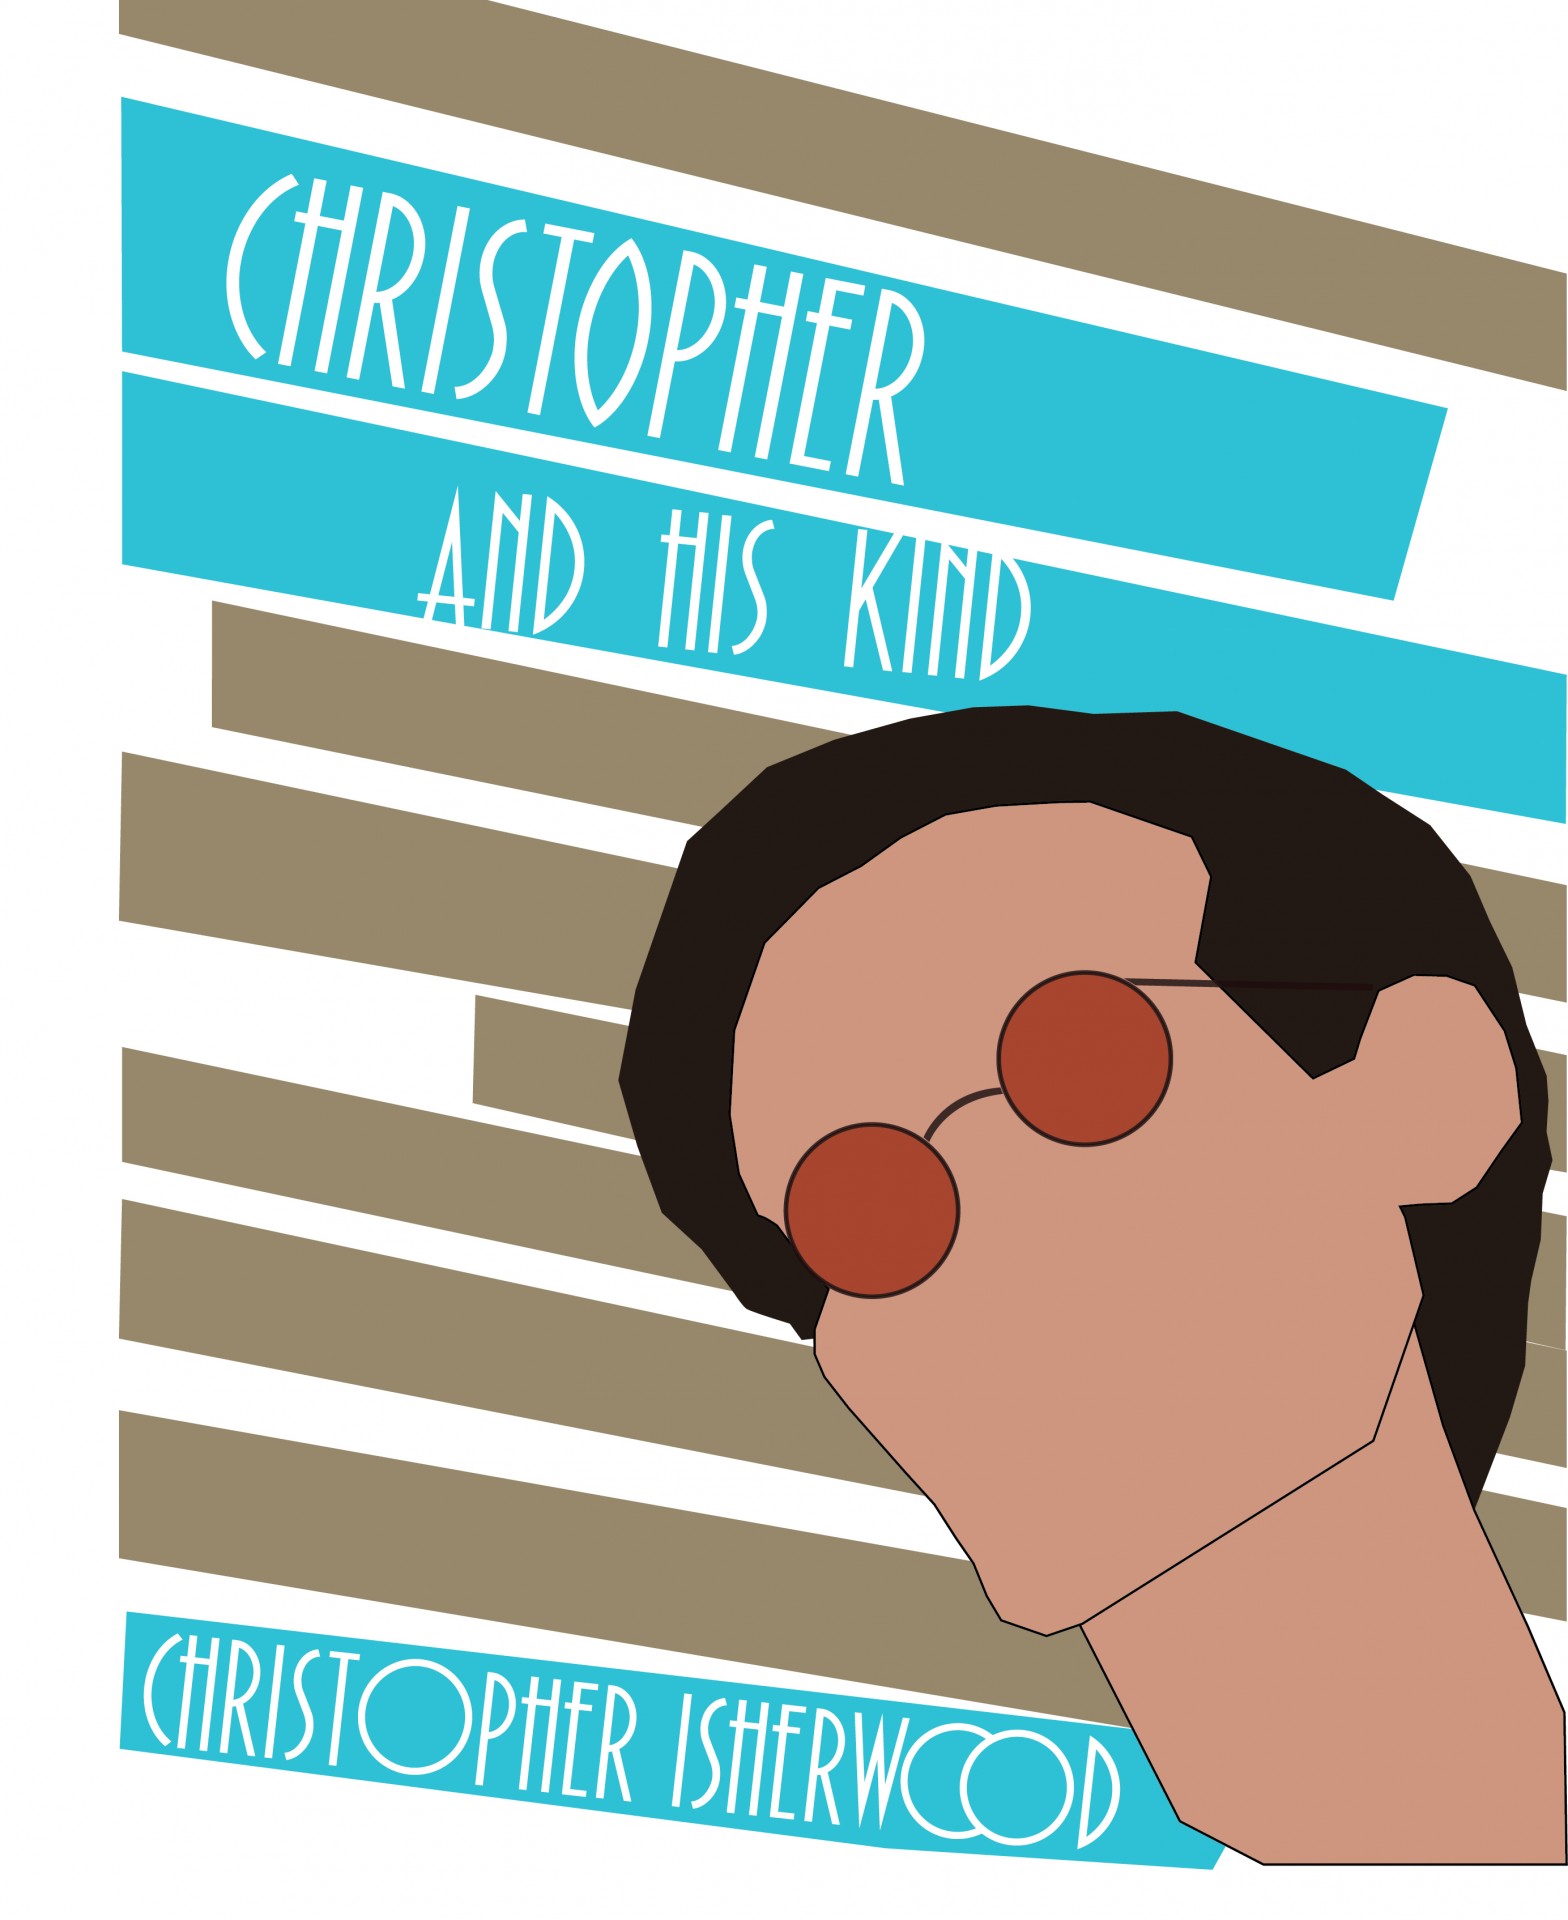 WGeary Christopher and His Kind Book Cover